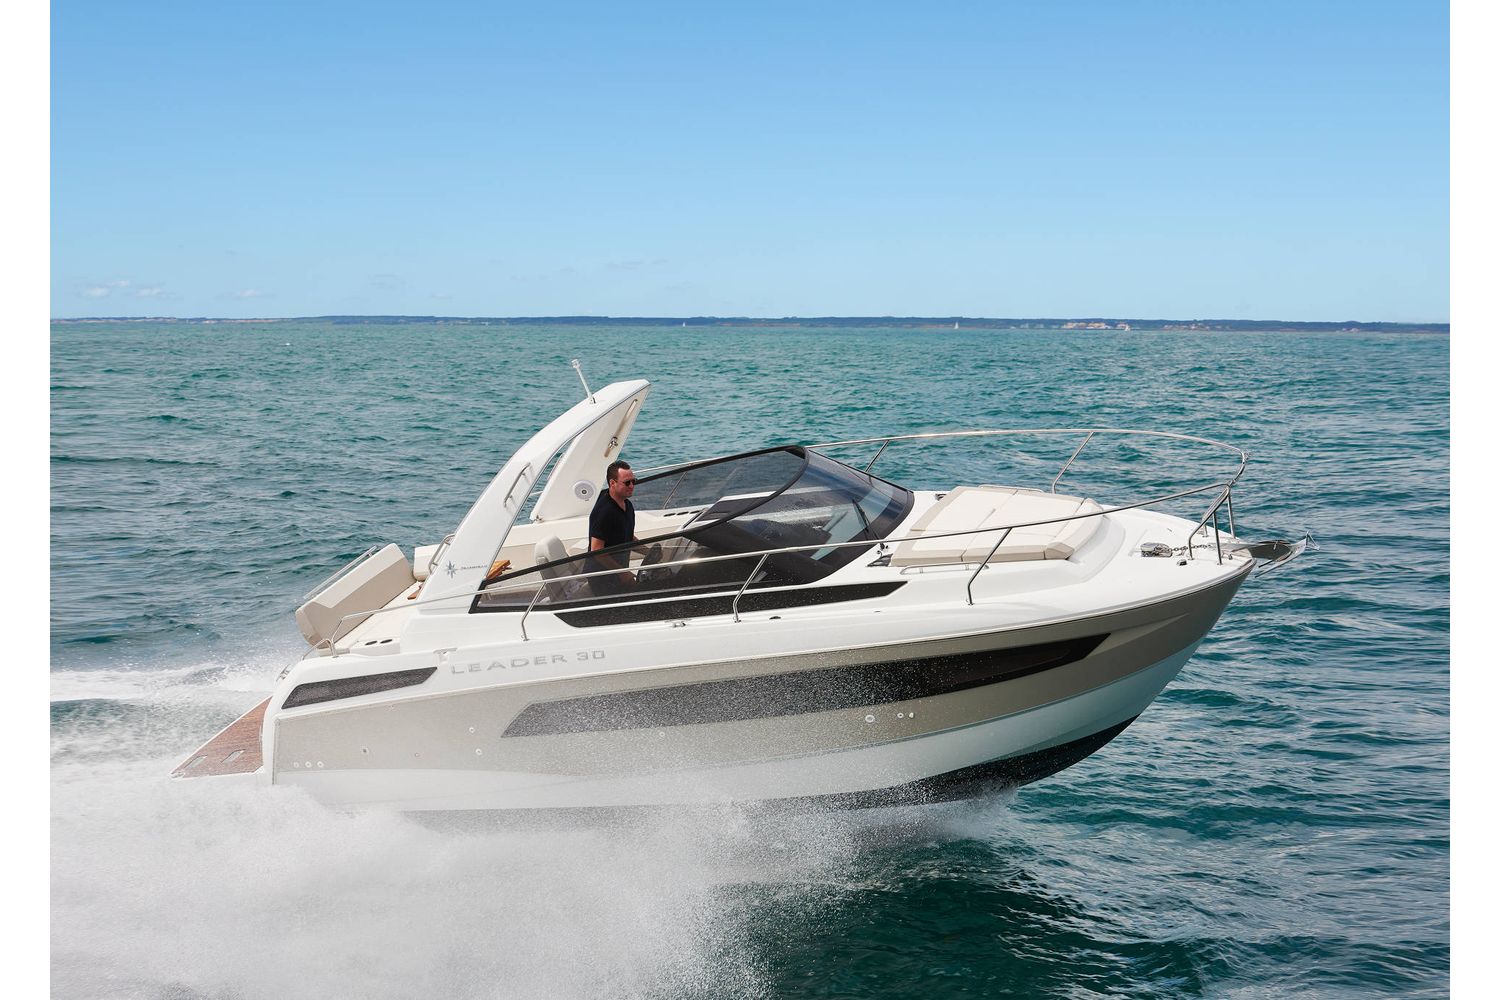 Jeanneau Leader 30 - on the water